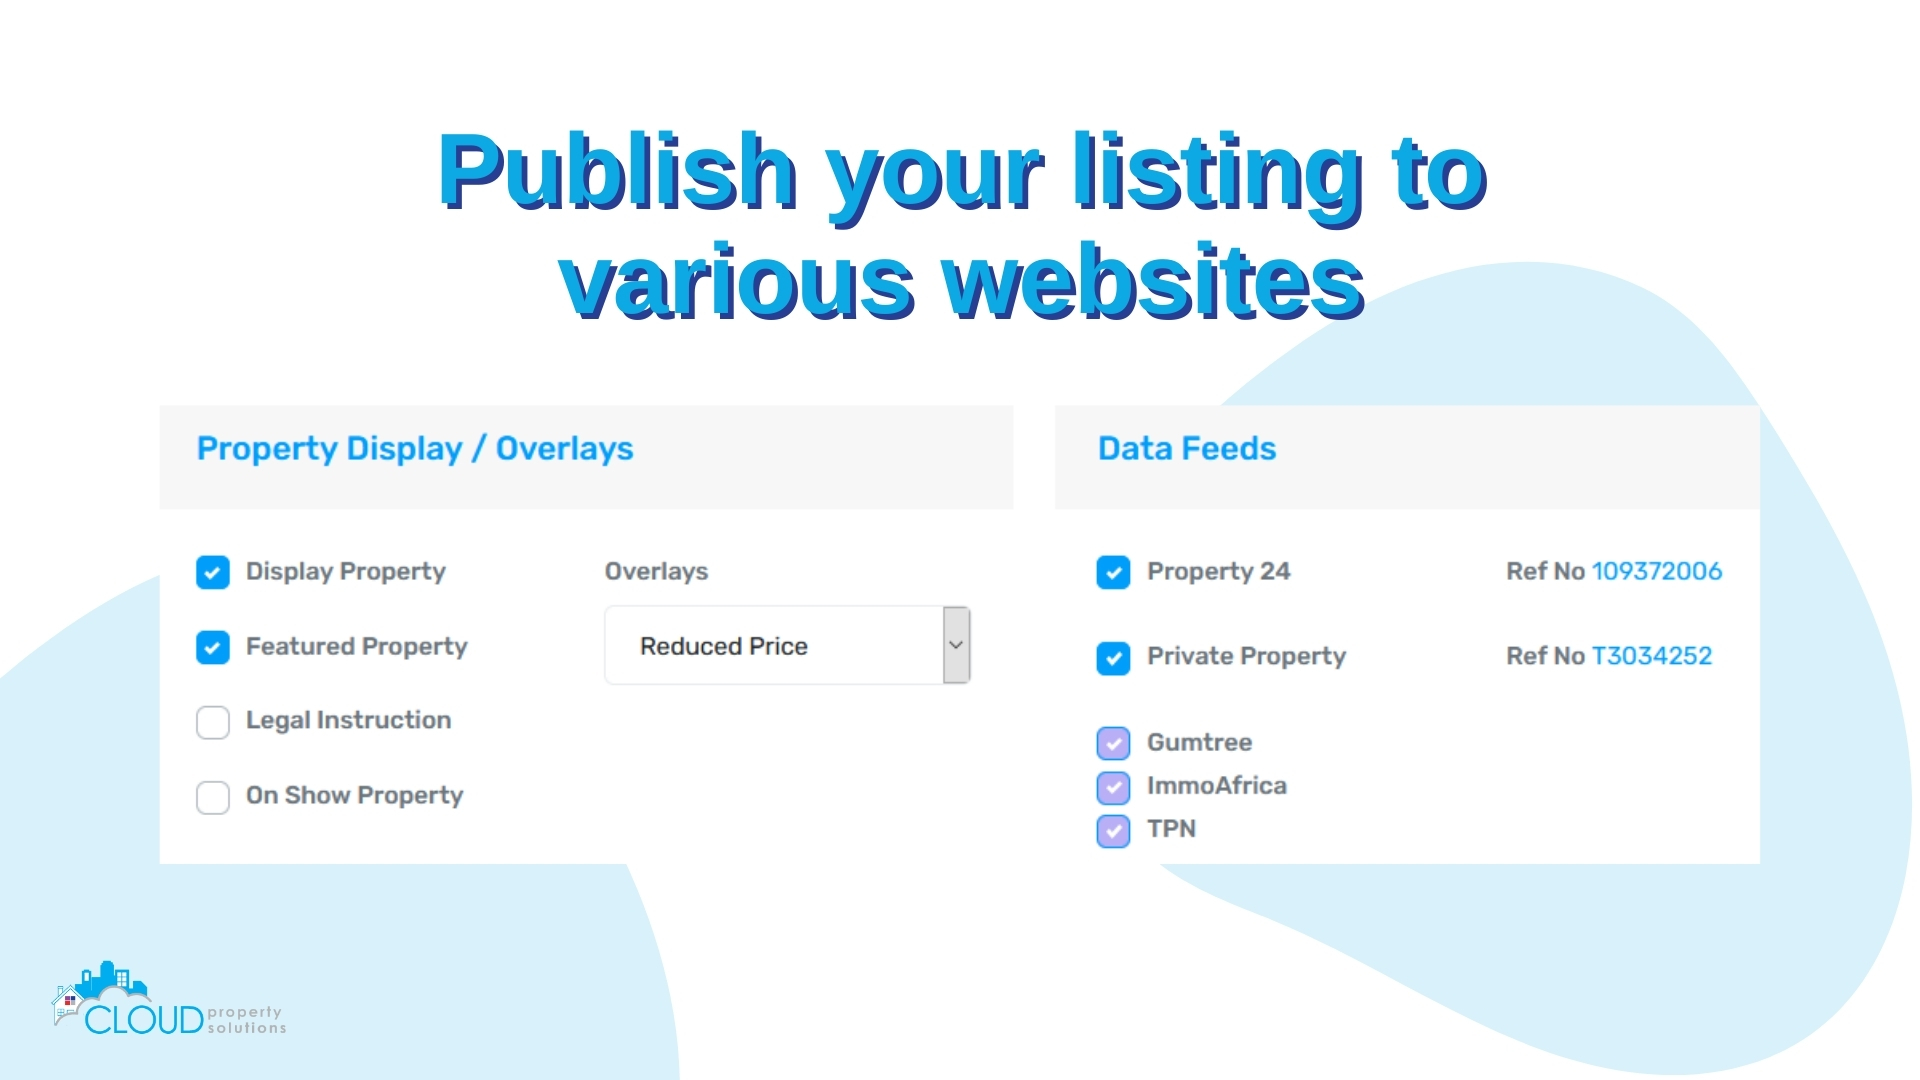 Publish your listing to various property portal websites